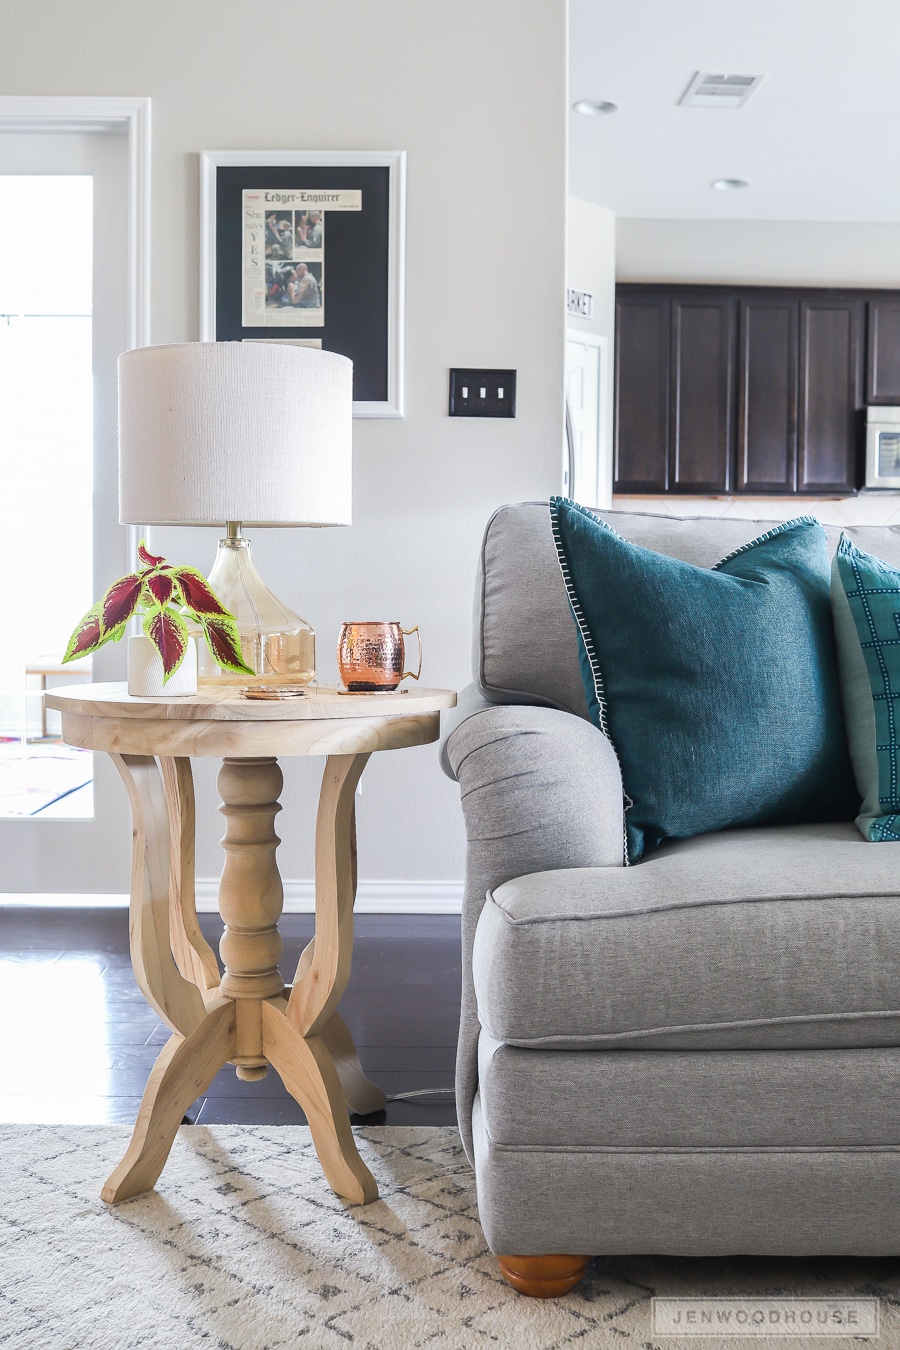 How to add small seasonal touches to your living room to decorate for Fall